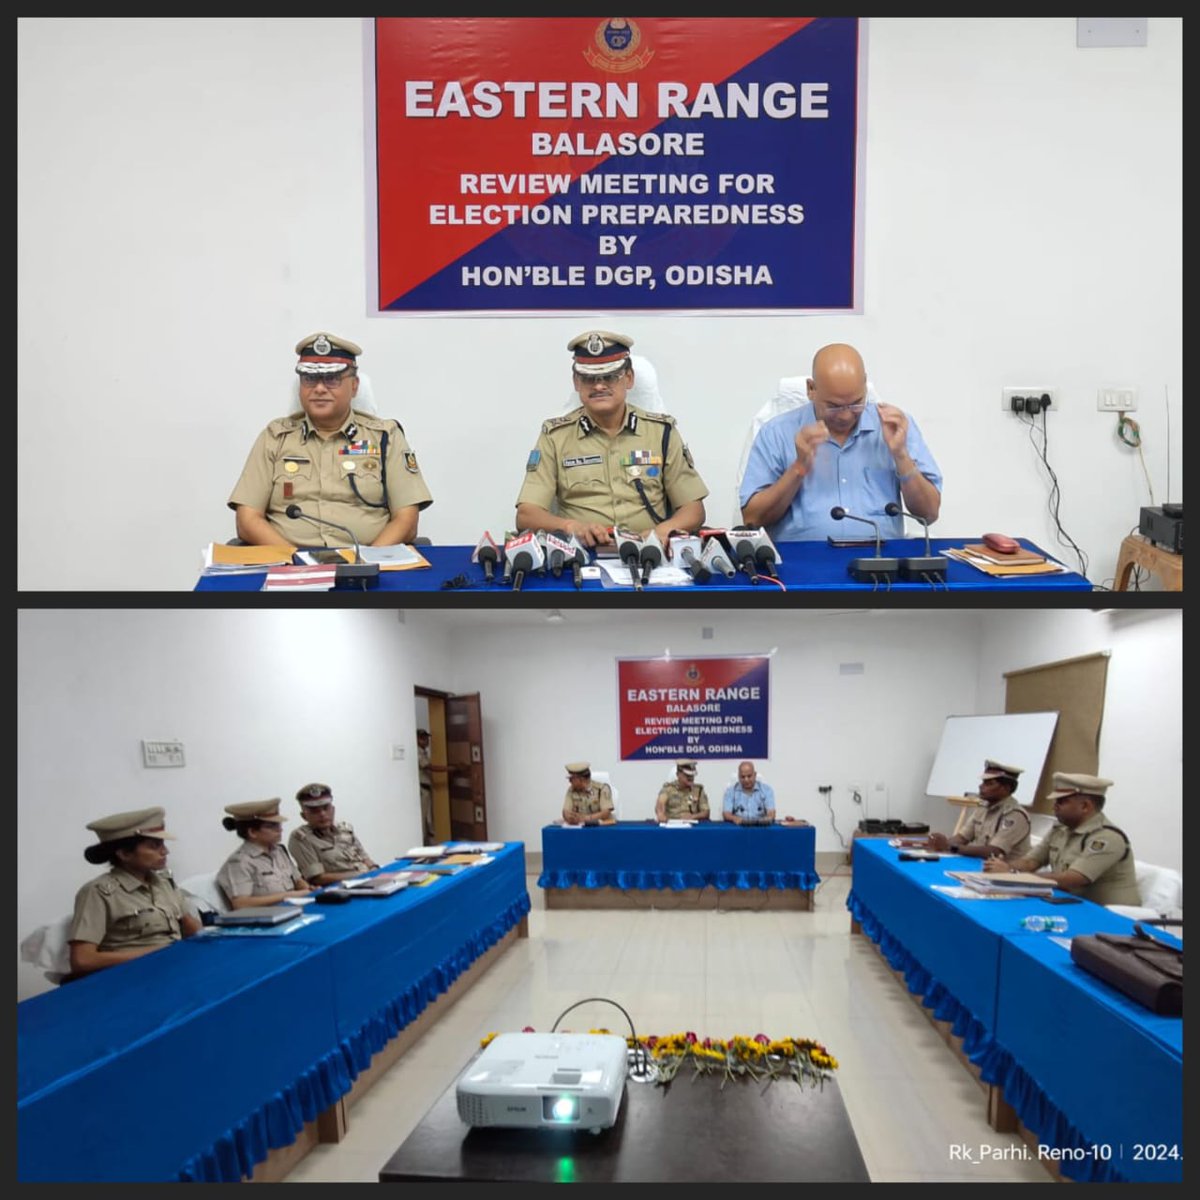 A review meeting for election preparedness of Eastern Range was conducted by Hon'ble DGP Odisha with Dir Int, ADG L/O, @igerbalasore & SPs in light of the upcoming #GeneralElections2024 with an aim to ensure a peaceful and impartial poll adhering to instructions of the ECI.